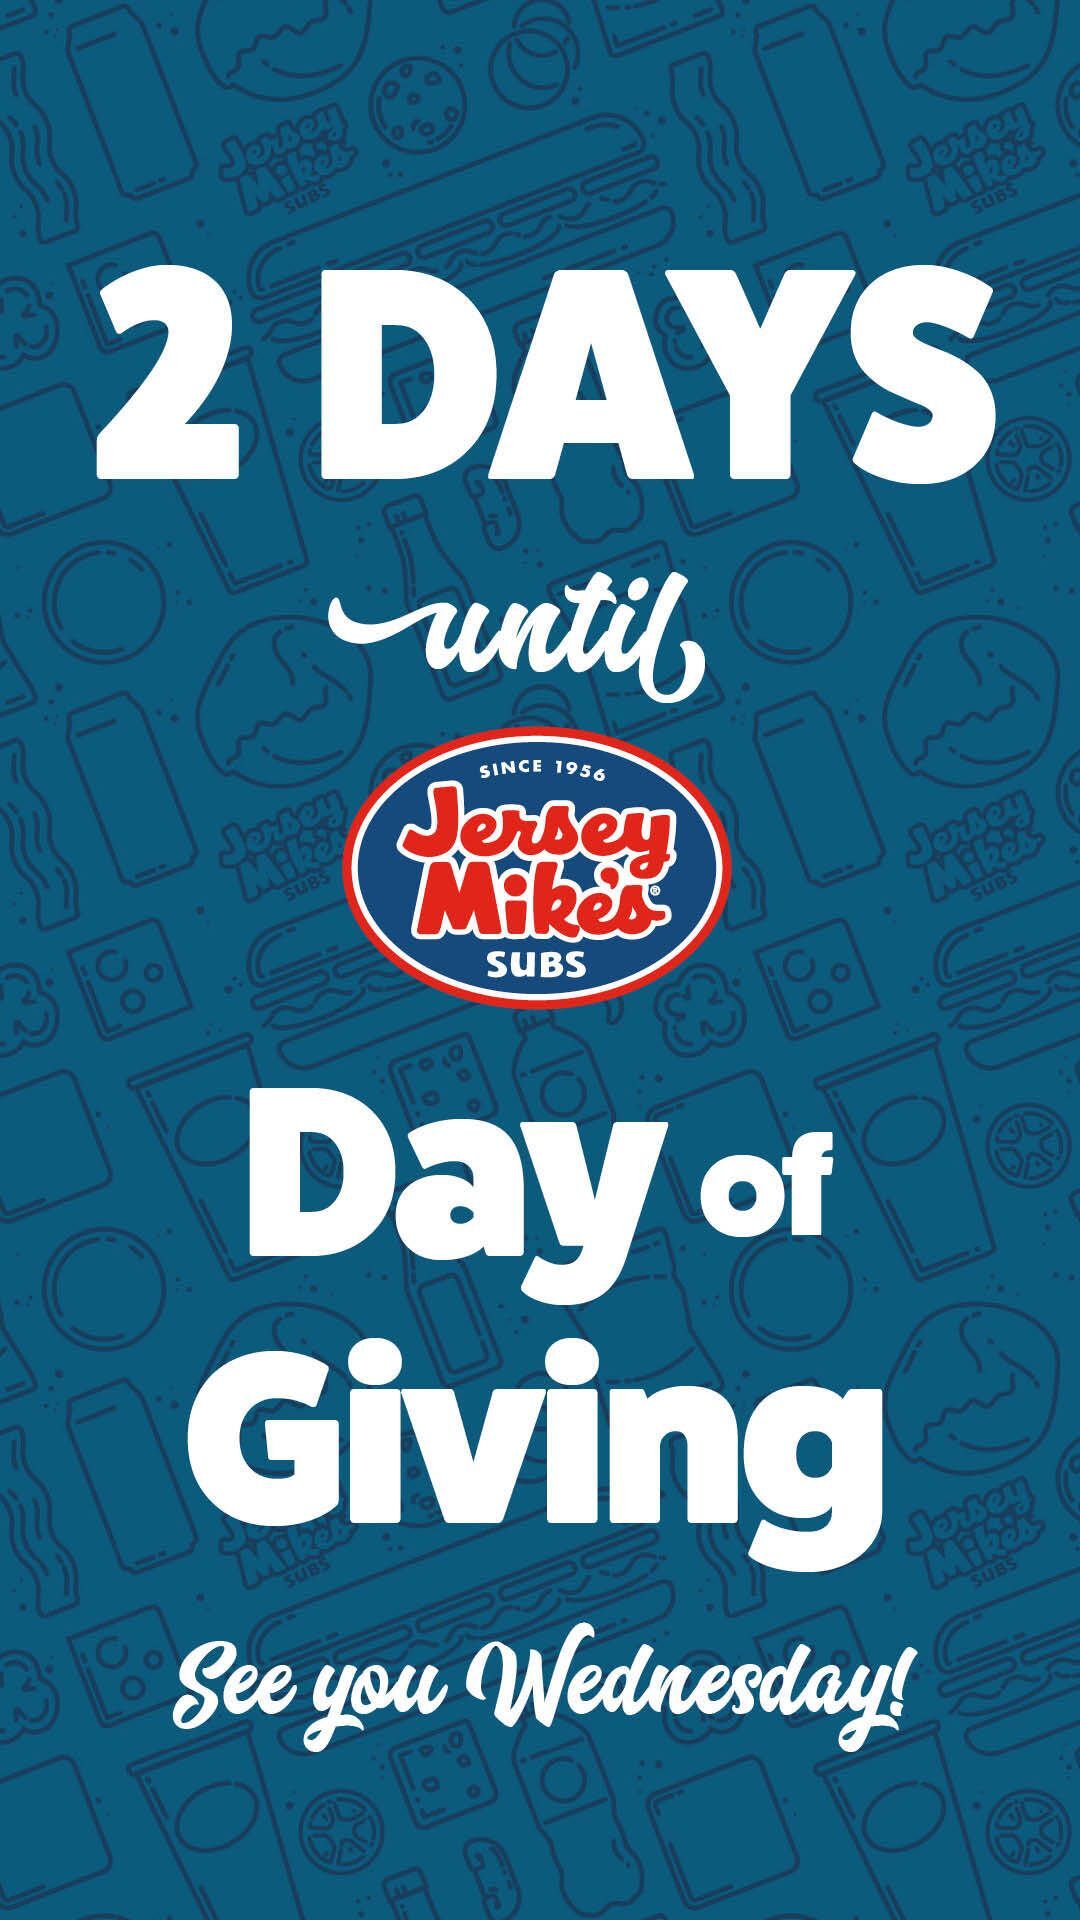 Jersey Mikes Day of Giving is this Wednesday!